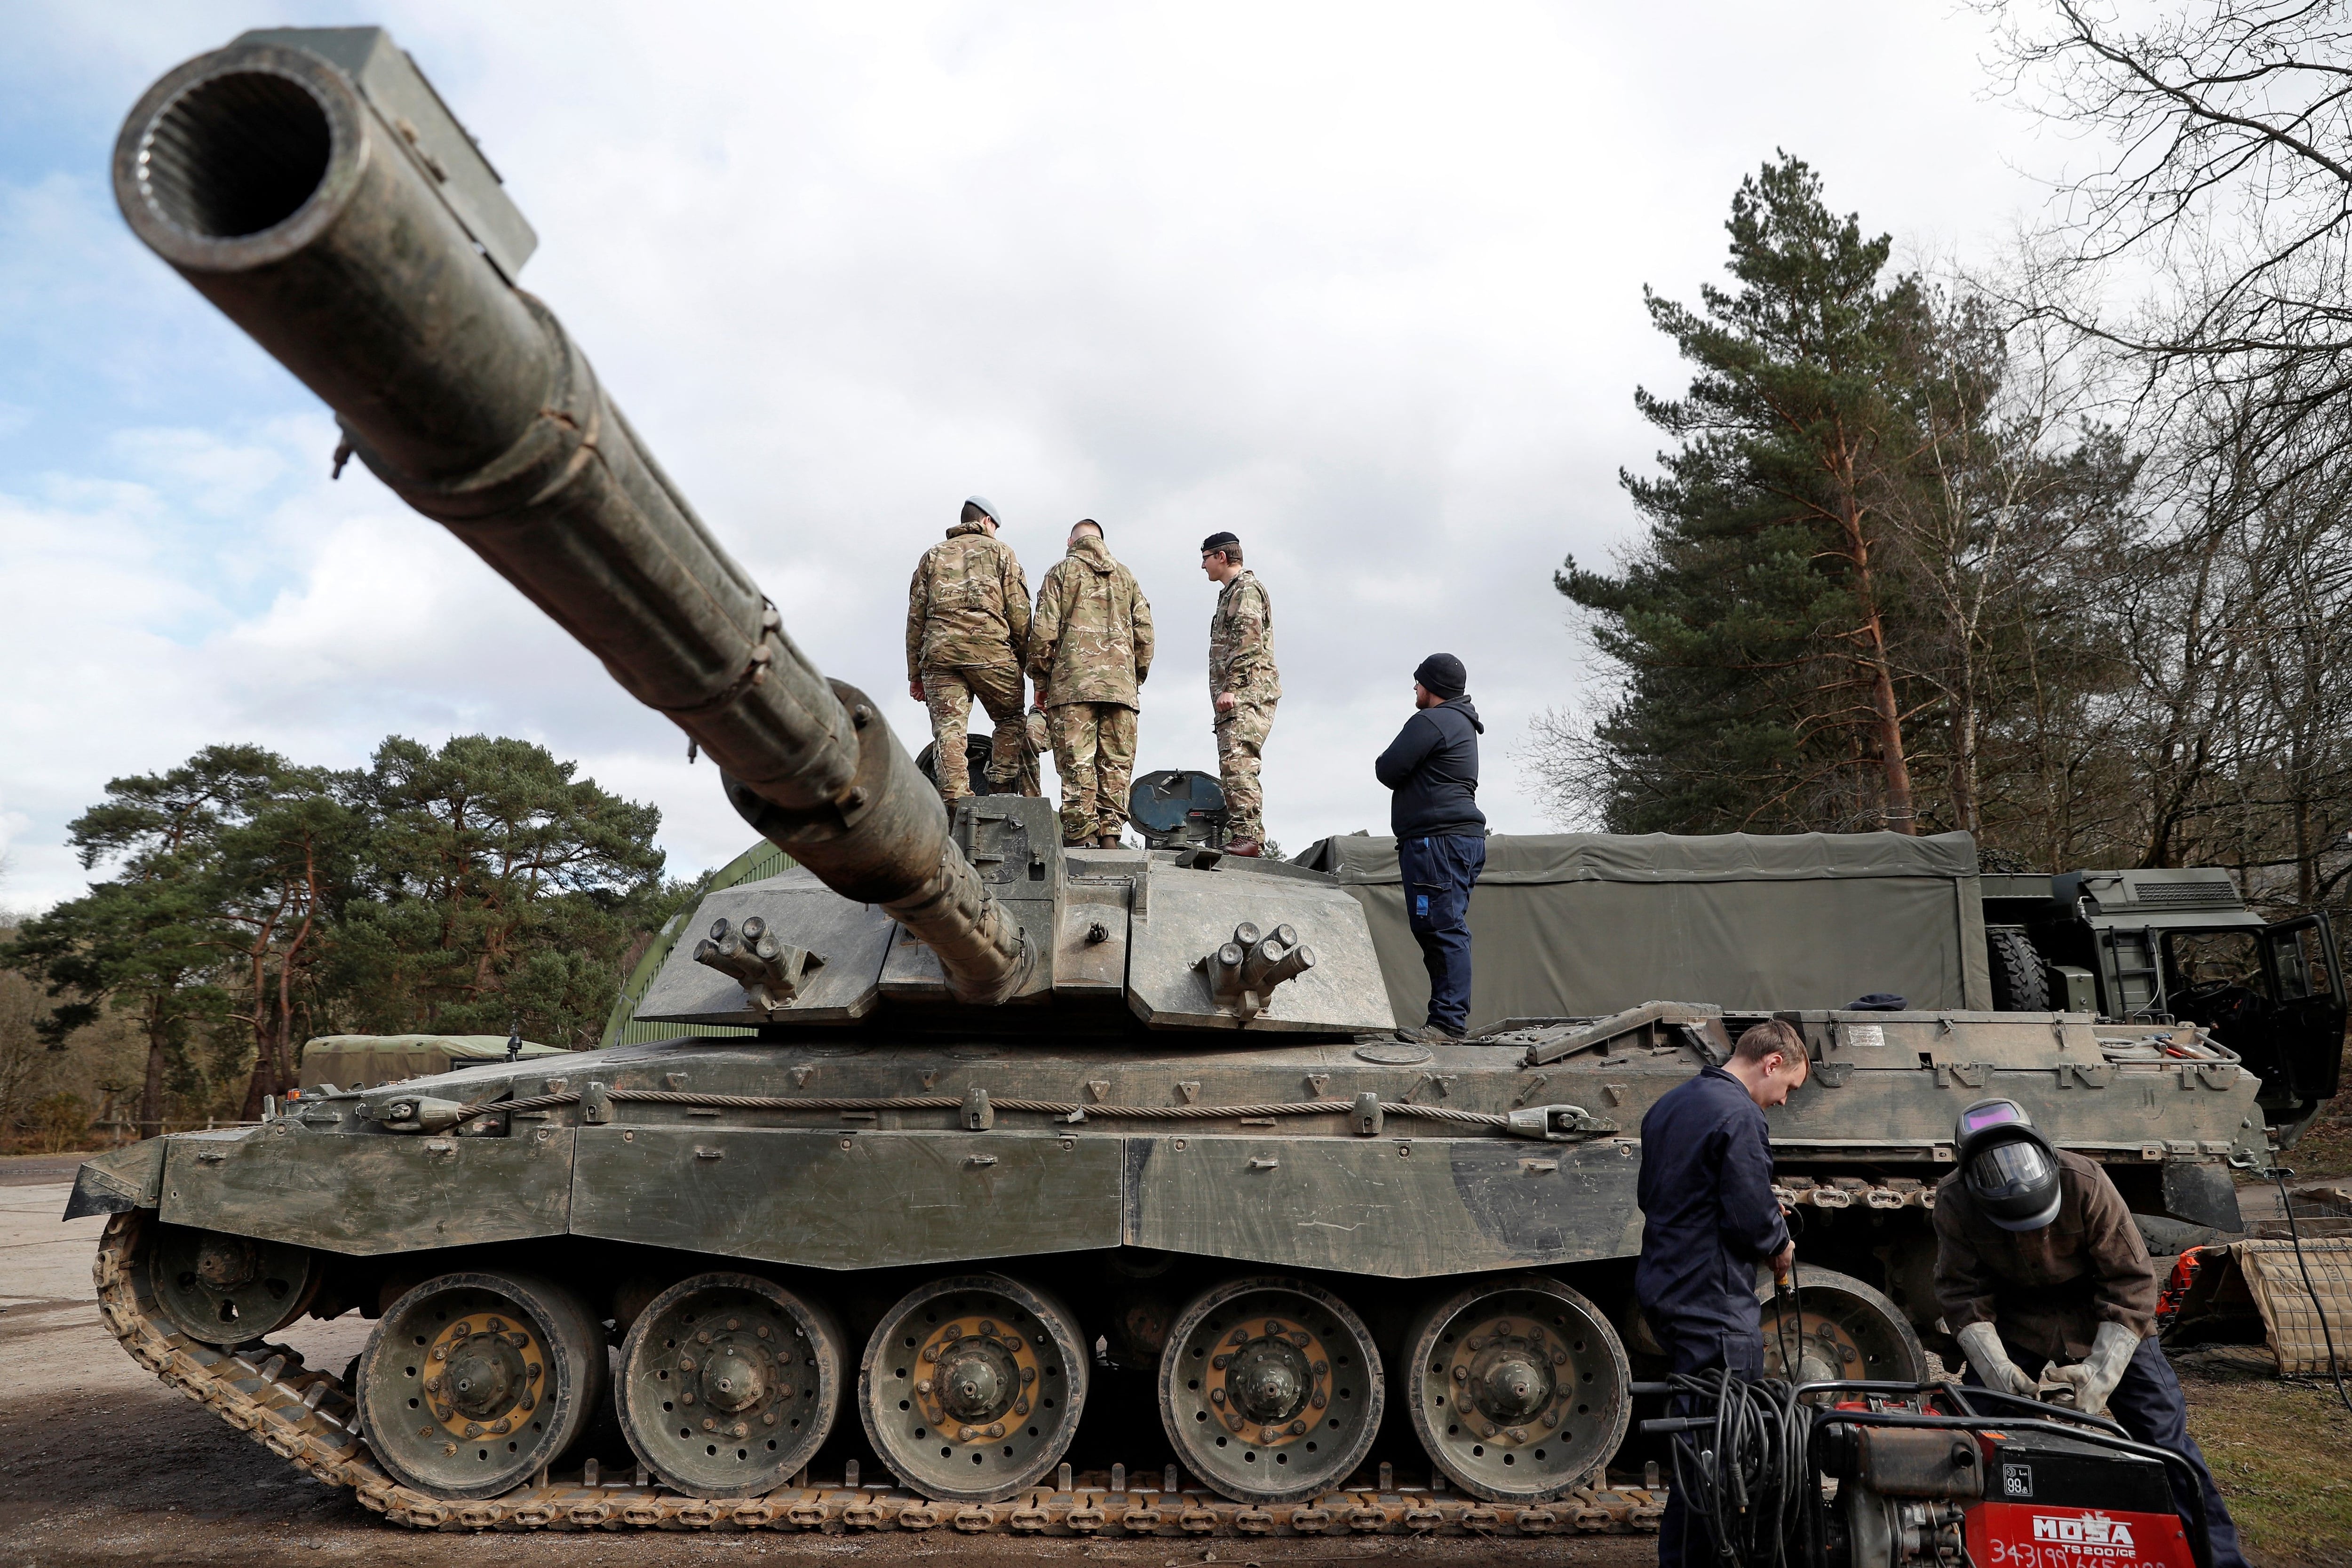 Challenger 2: The heavy duty British tank being used by Ukraine